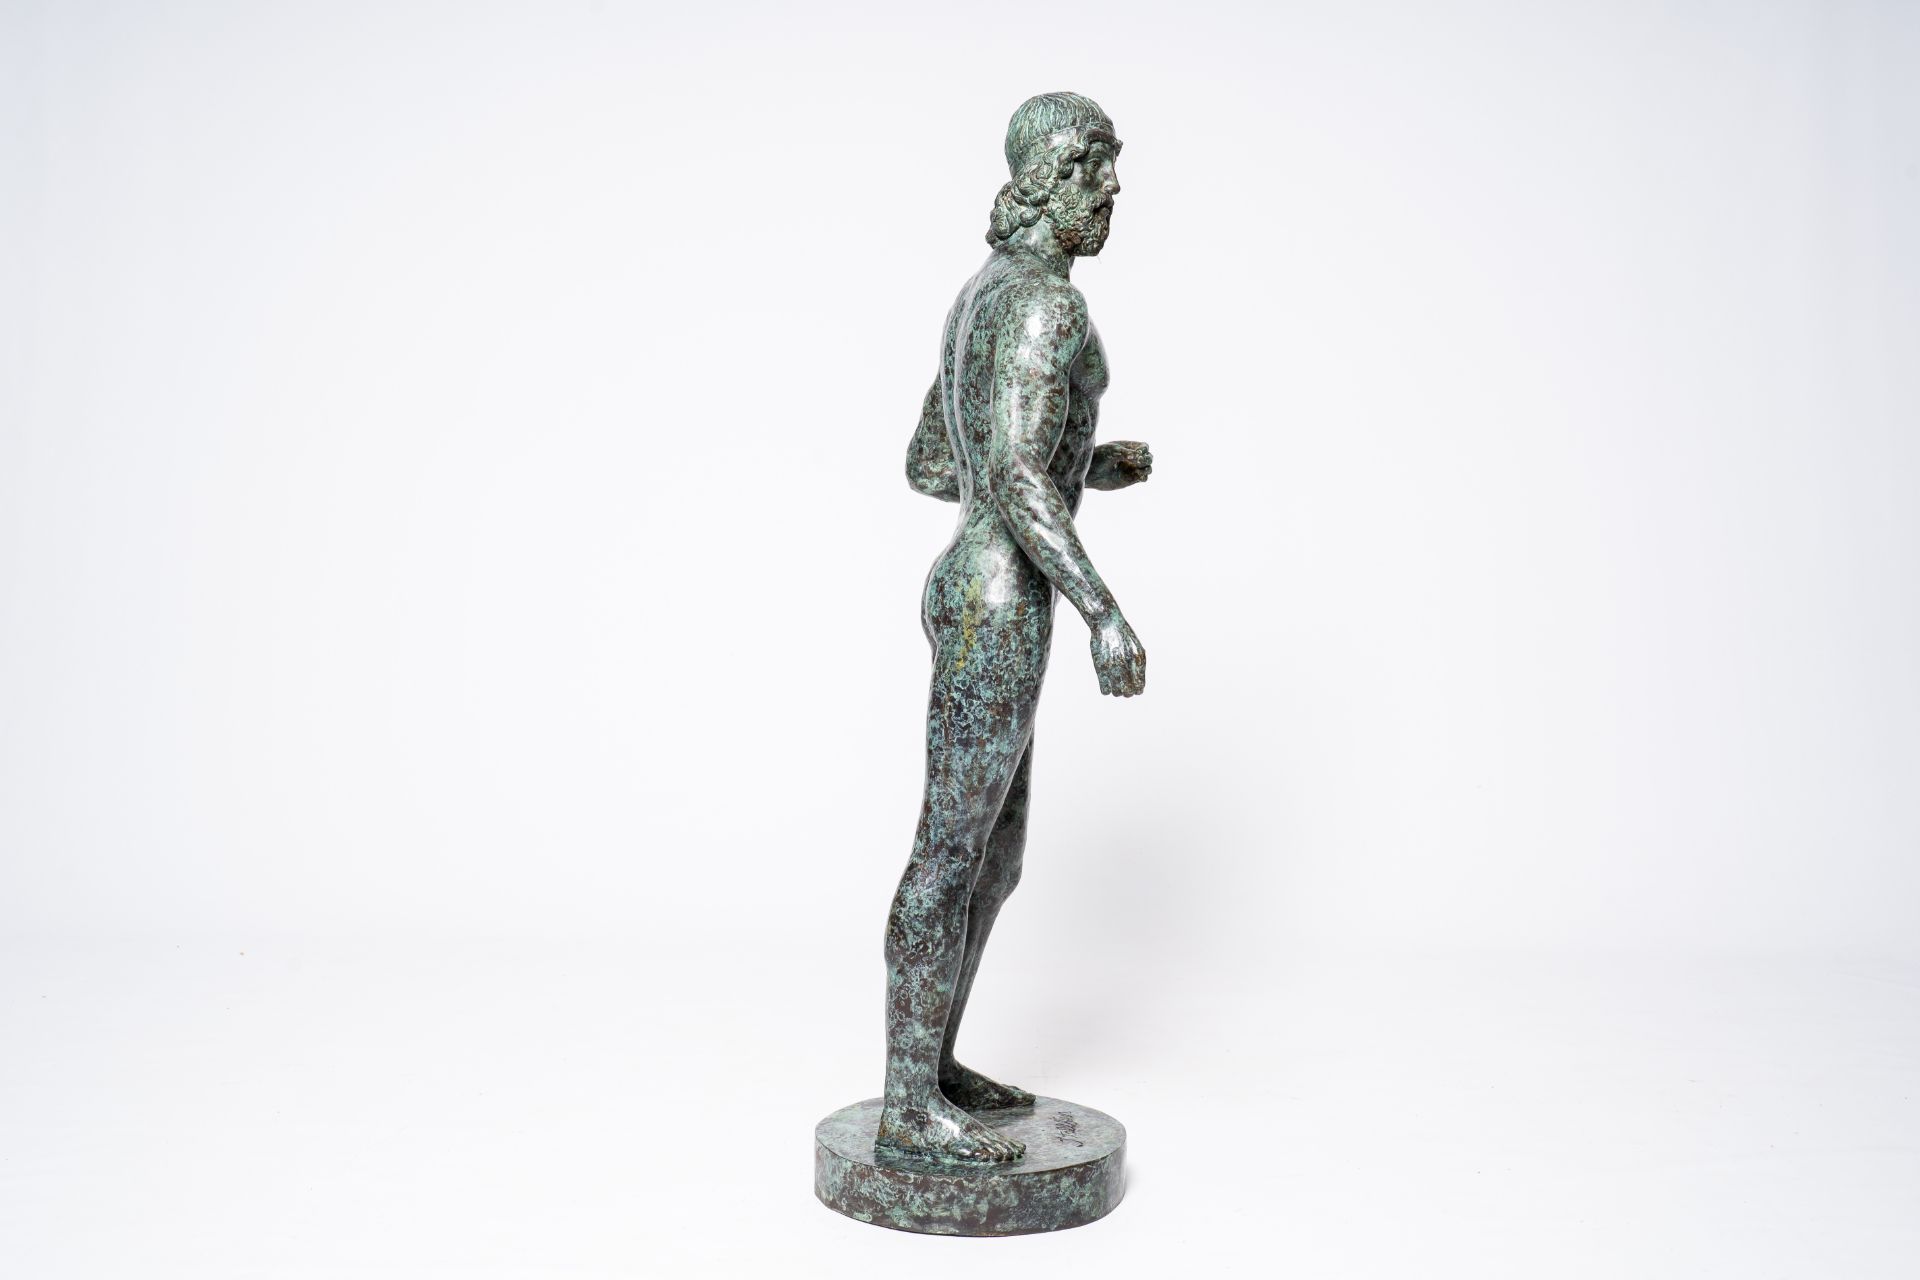 After the antique, J. Tallsten (?): A Riace bronze, bronze with green marbled patina, 20th C. - Image 4 of 7